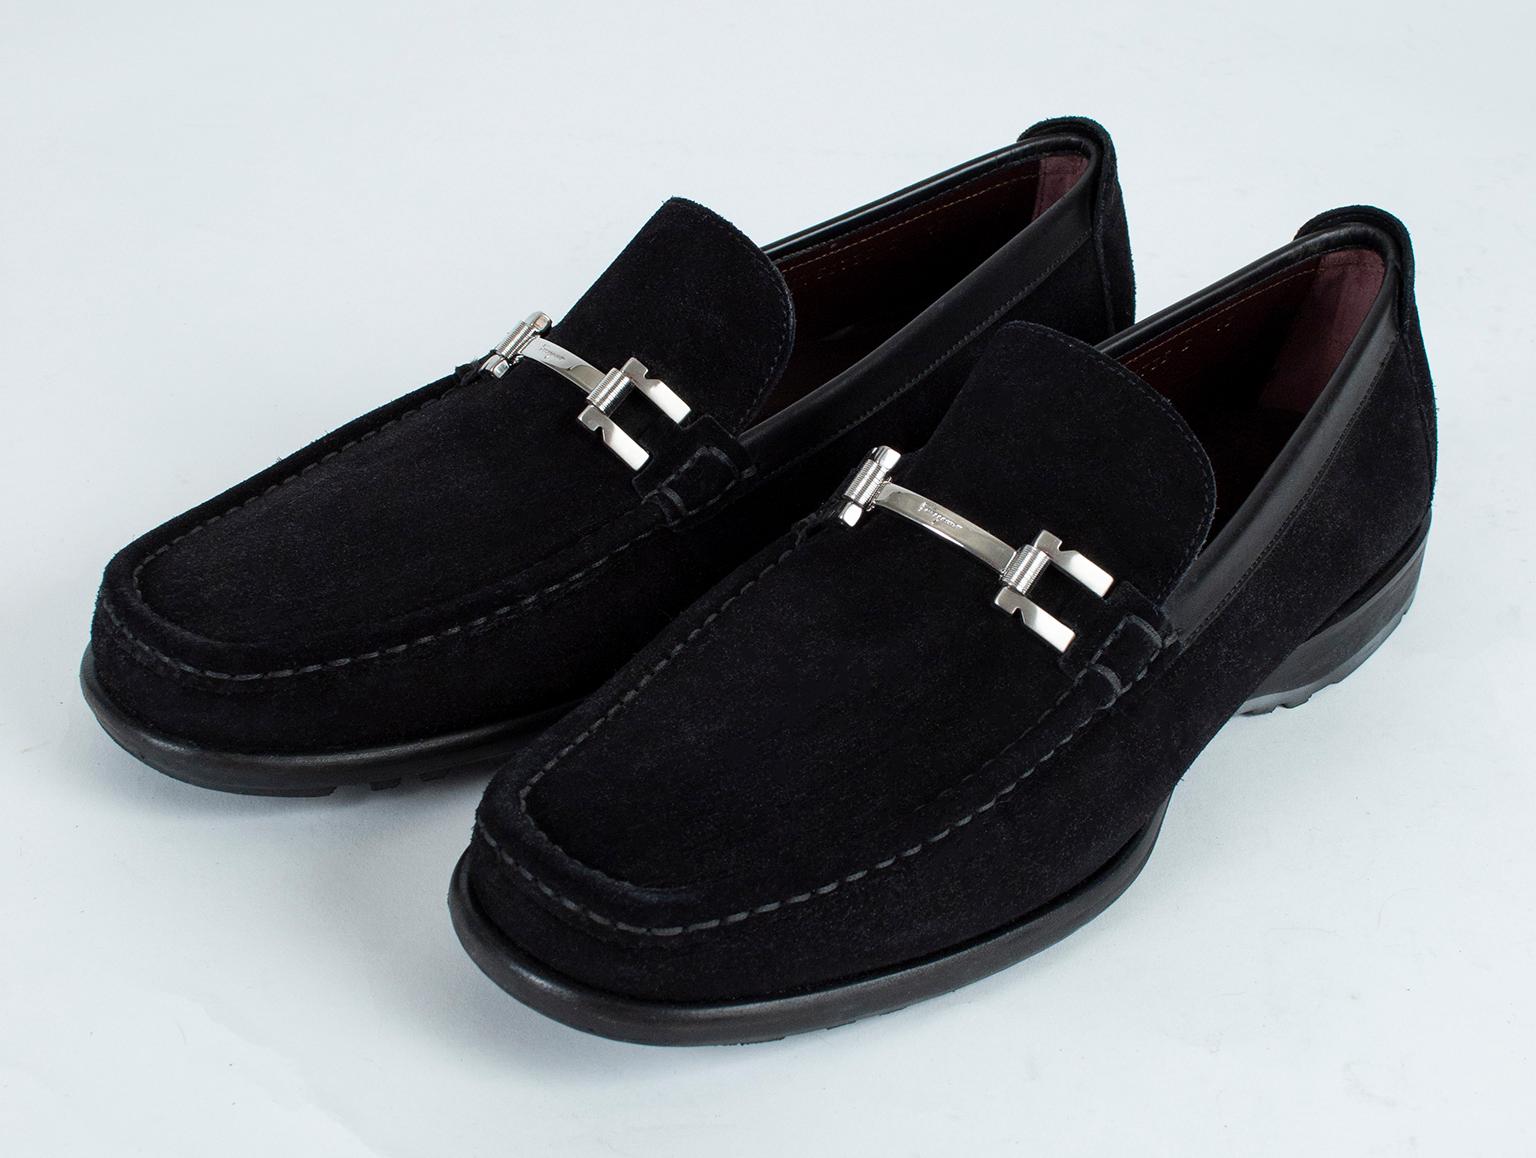 Every well-dressed man needs a foolproof pair of horse bit loafers, and Ferragamos are one of the standards against which all others are measured. From their combination of polished and brushed silver bits to their “blackest black” hue to their